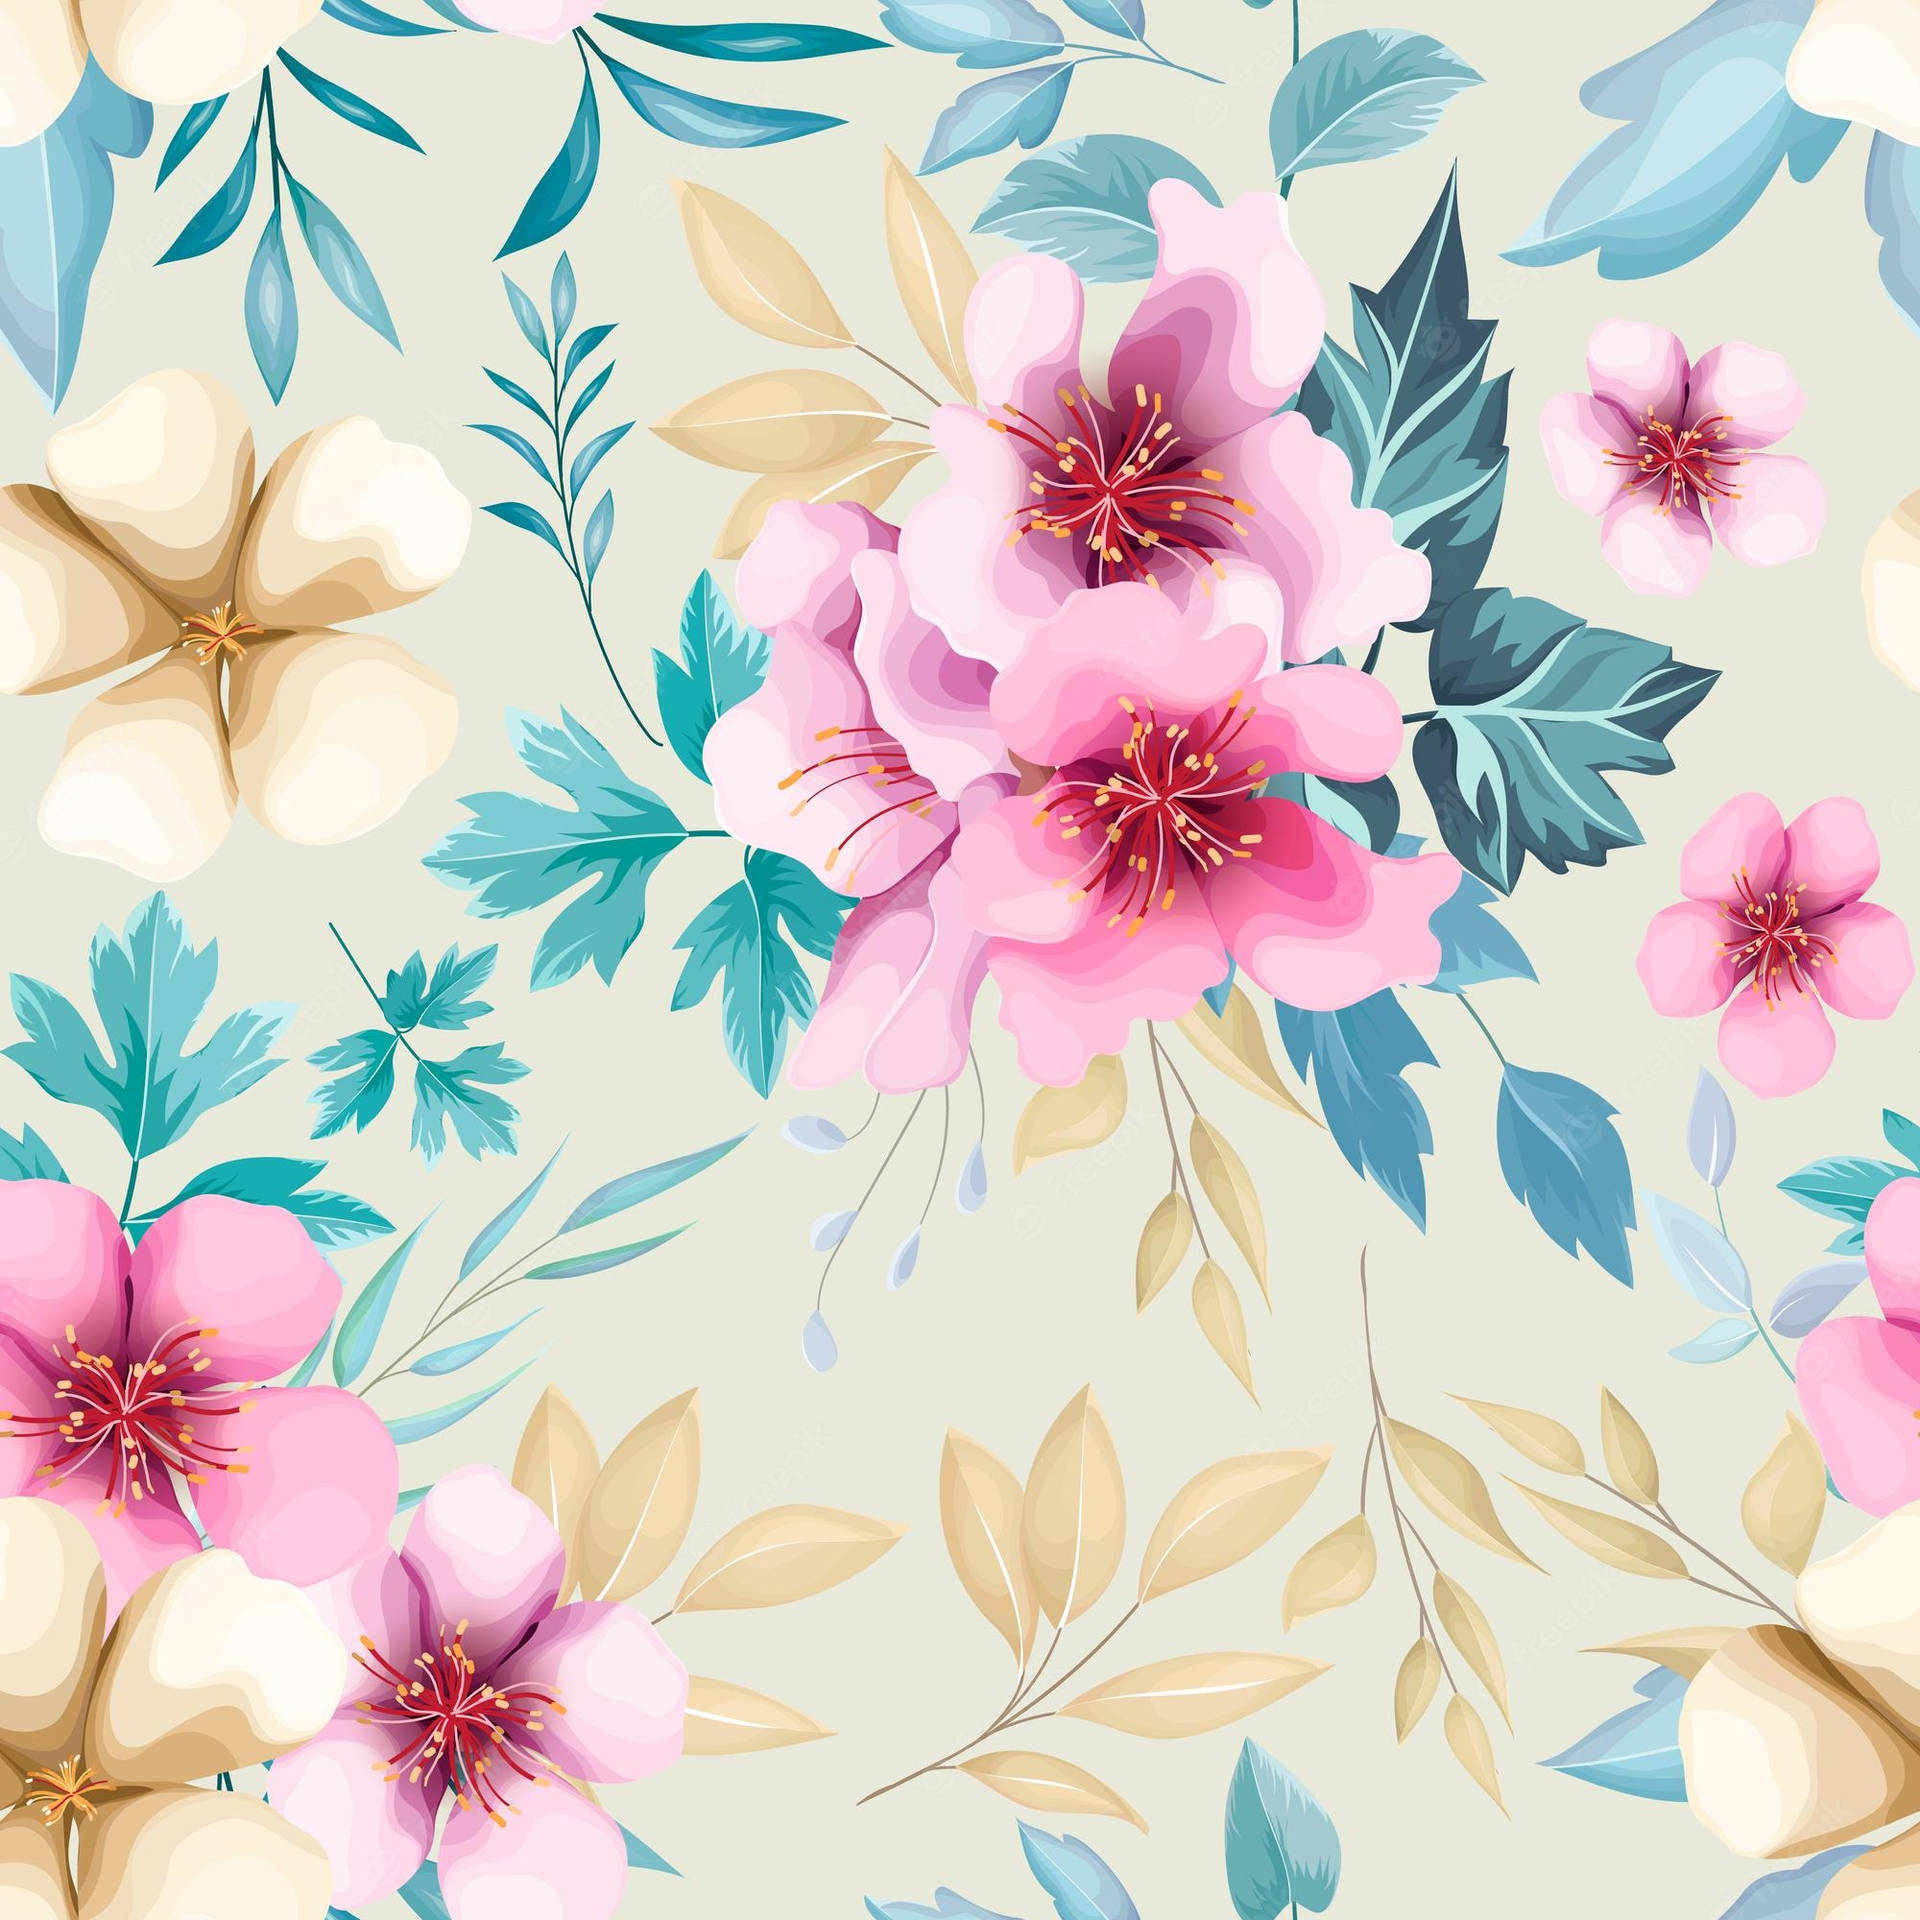 Elegant Flower Design with White and Pink Flowers Wallpaper